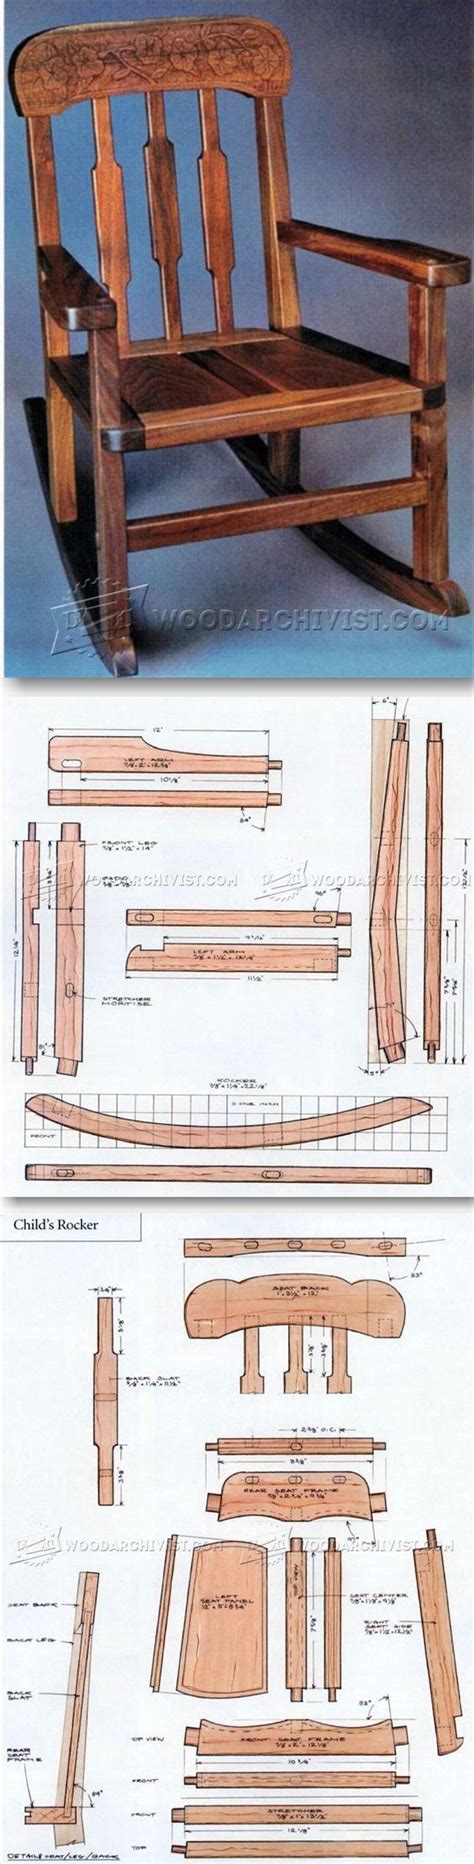 Simple Plans For Building A Childs Rocking Chair Jason Lewis Price